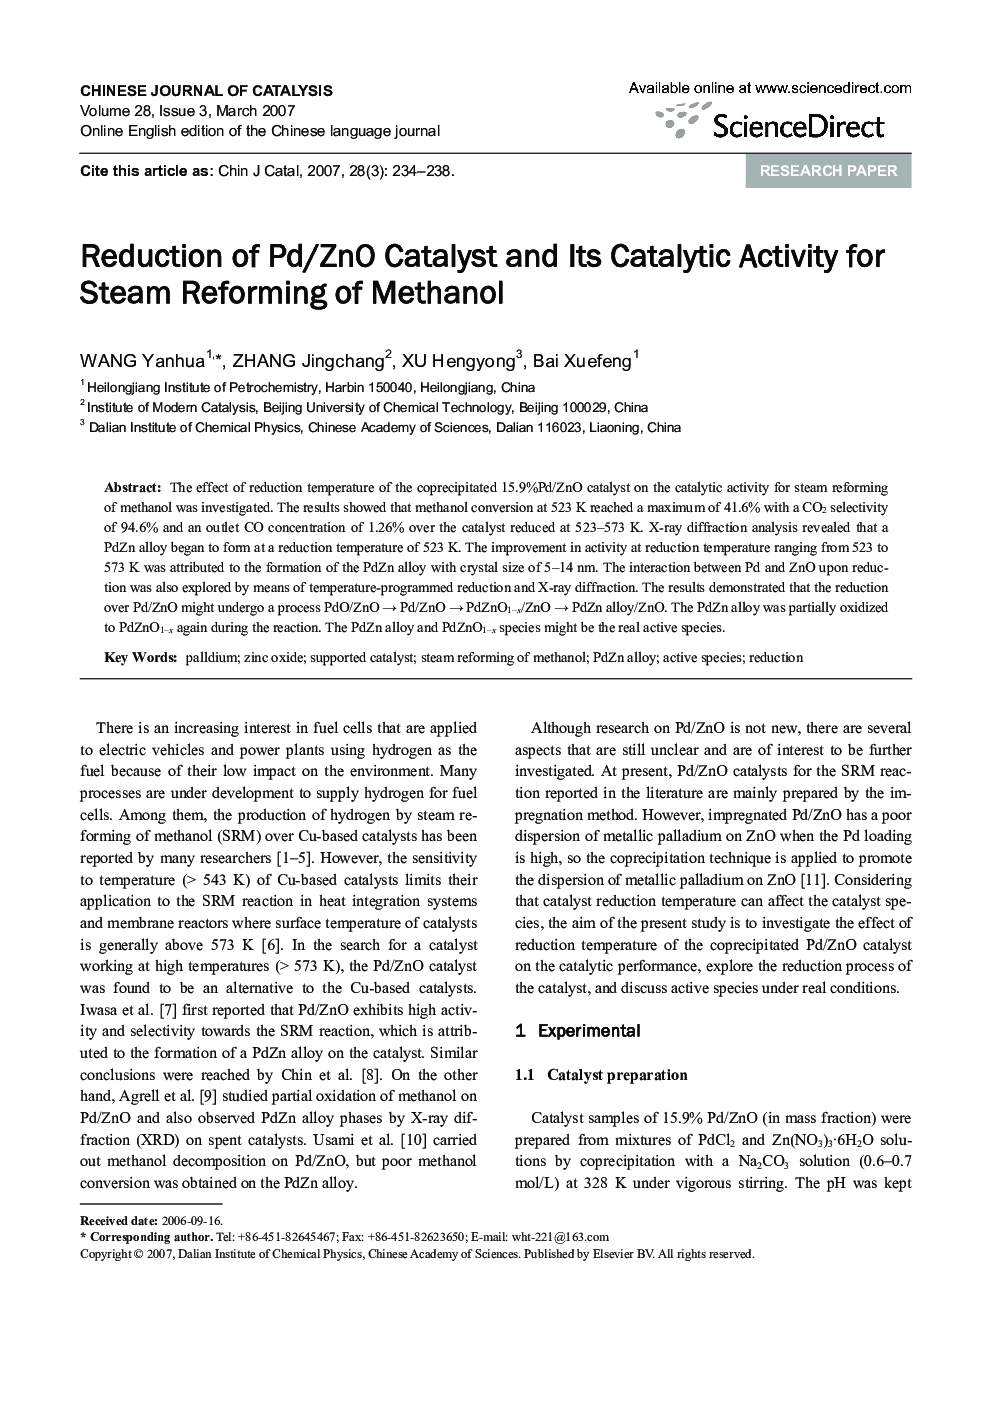 Reduction of Pd/ZnO Catalyst and Its Catalytic Activity for Steam Reforming of Methanol